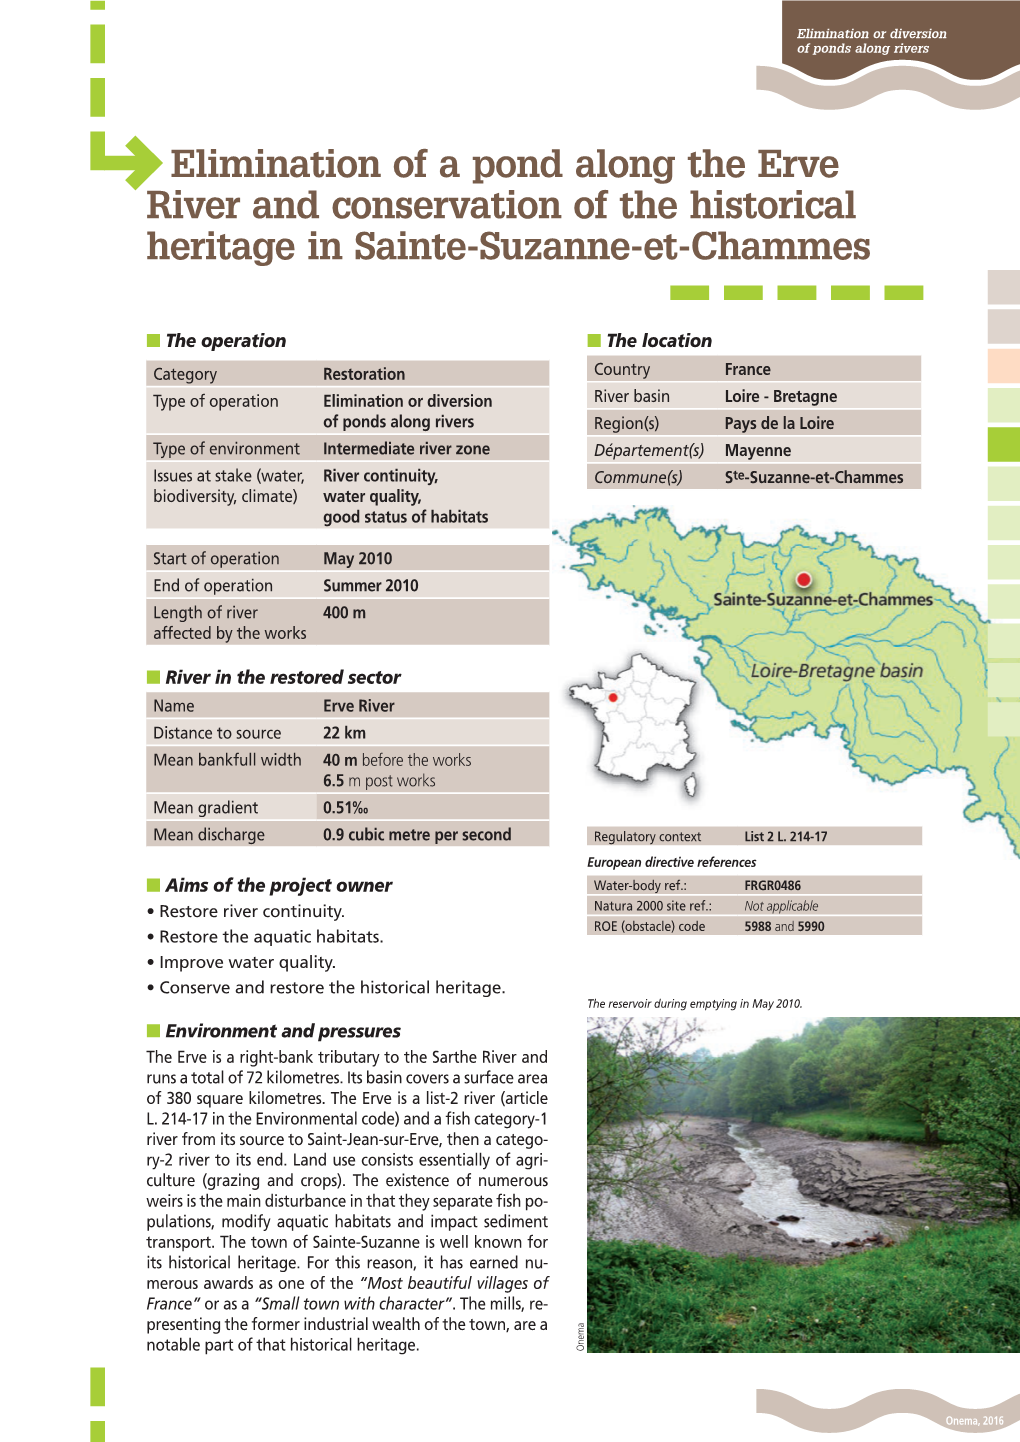 Elimination of a Pond Along the Erve River and Conservation of the Historical Heritage in Sainte-Suzanne-Et-Chammes